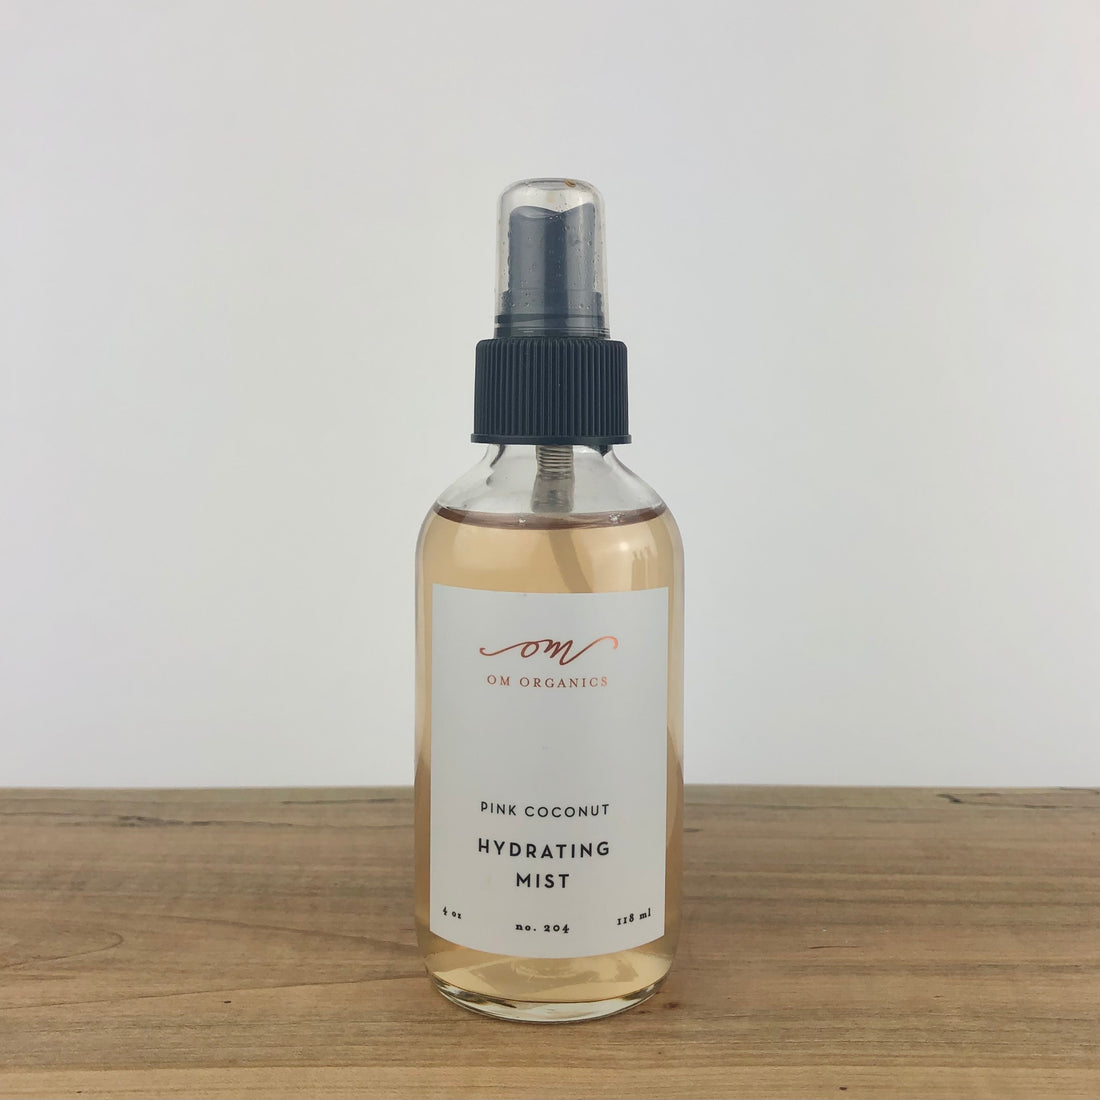 HYDRATING PINK COCONUT FACIAL MIST